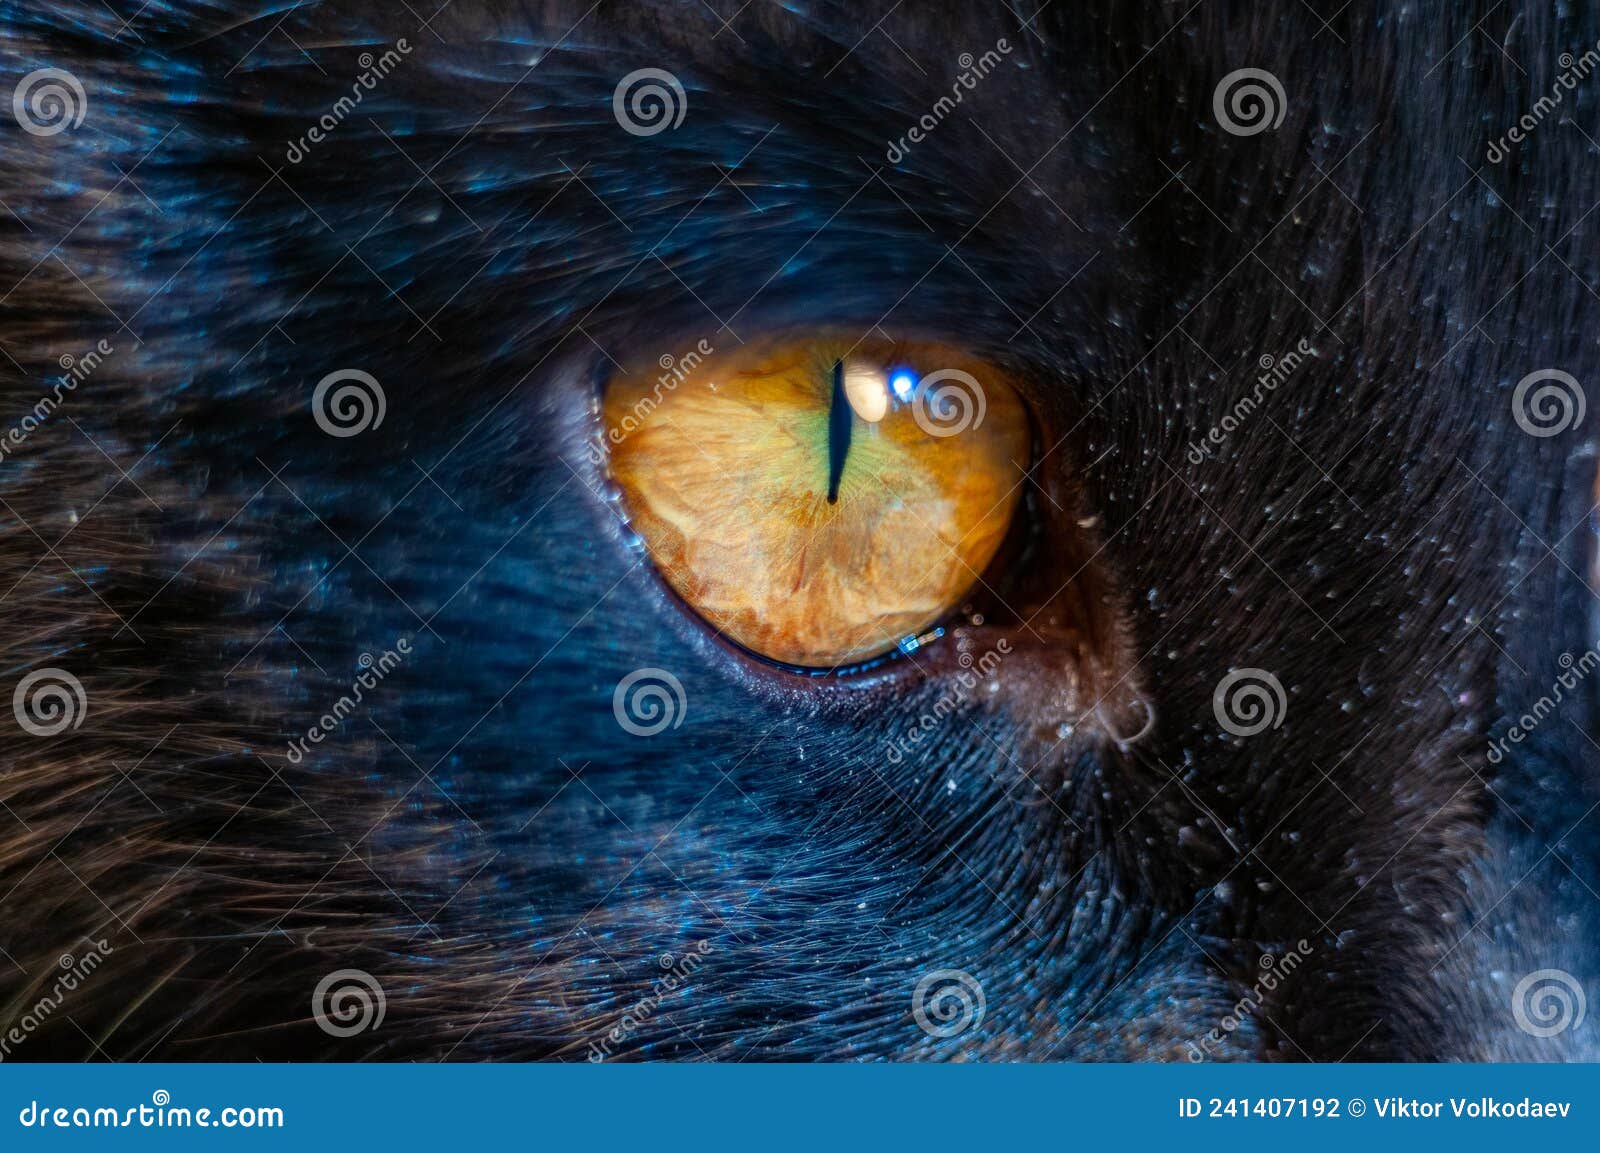 resterend dat is alles veiling Cat s eye in close-up! stock photo. Image of black, animal - 241407192